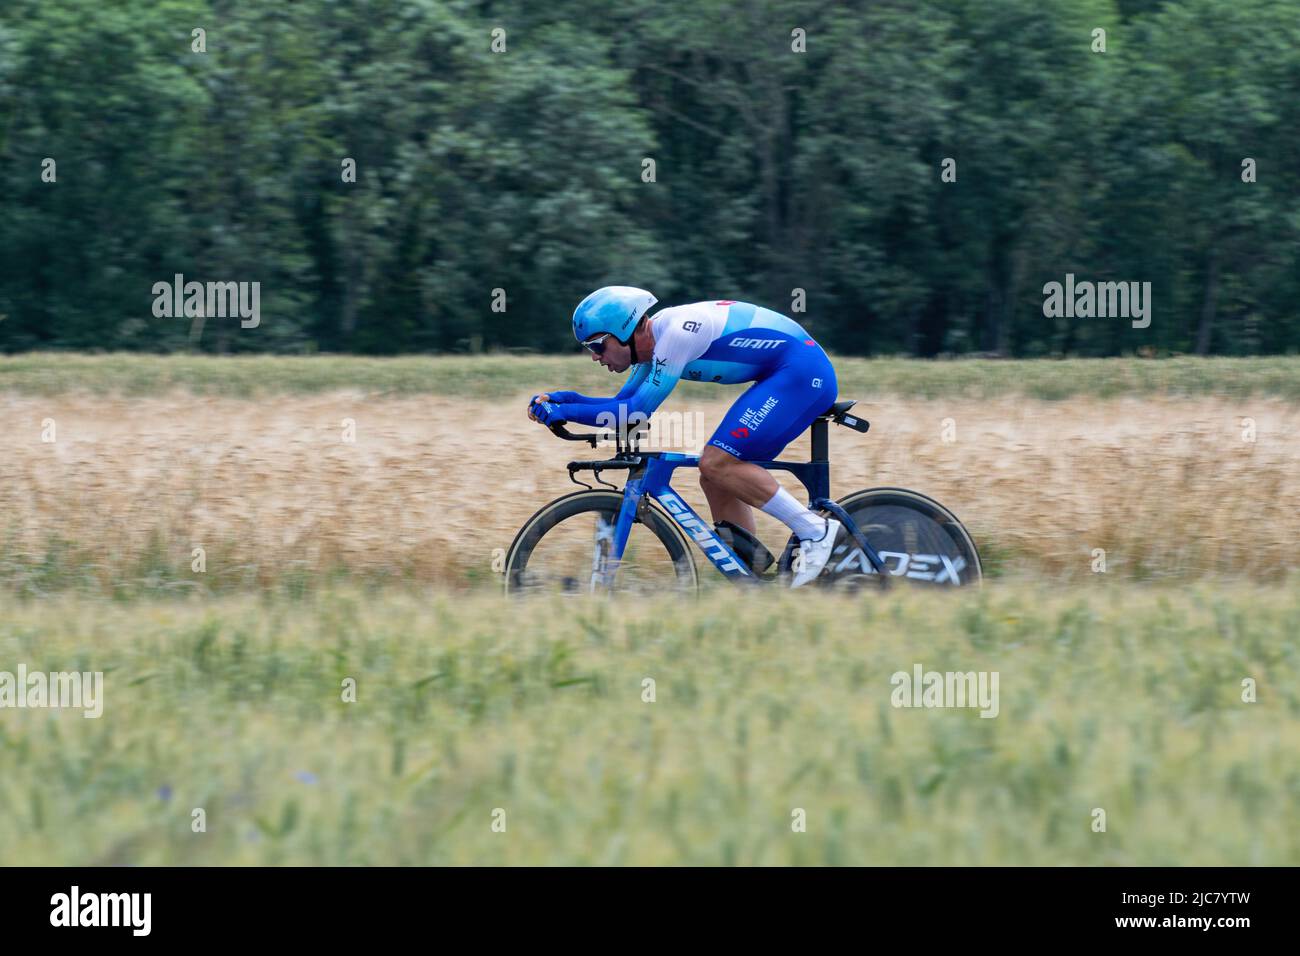 Montbrison, France. 08th June, 2022. Dylan Groenewegen (Bike Exchange - Jayco Team) seen in action during the 4th Stage of Criterium du Dauphine 2022. The fourth stage of the Criterium du Dauphine Libere is an individual time trial with a distance of 31.9 km between Montbrison and La Bâtie d'Urfé in the Loire department. The winner of the stage is Filippo Ganna (Ineos Grenadiers Team) in 35mn 32s. He is ahead of Wout Van Aert (Jumbo Visma Team), 2nd at 2s, and Eythan Hayter (Ineos Grenadiers Team) at 17s. (Photo by Laurent Coust/SOPA Images/Sipa USA) Credit: Sipa USA/Alamy Live News Stock Photo